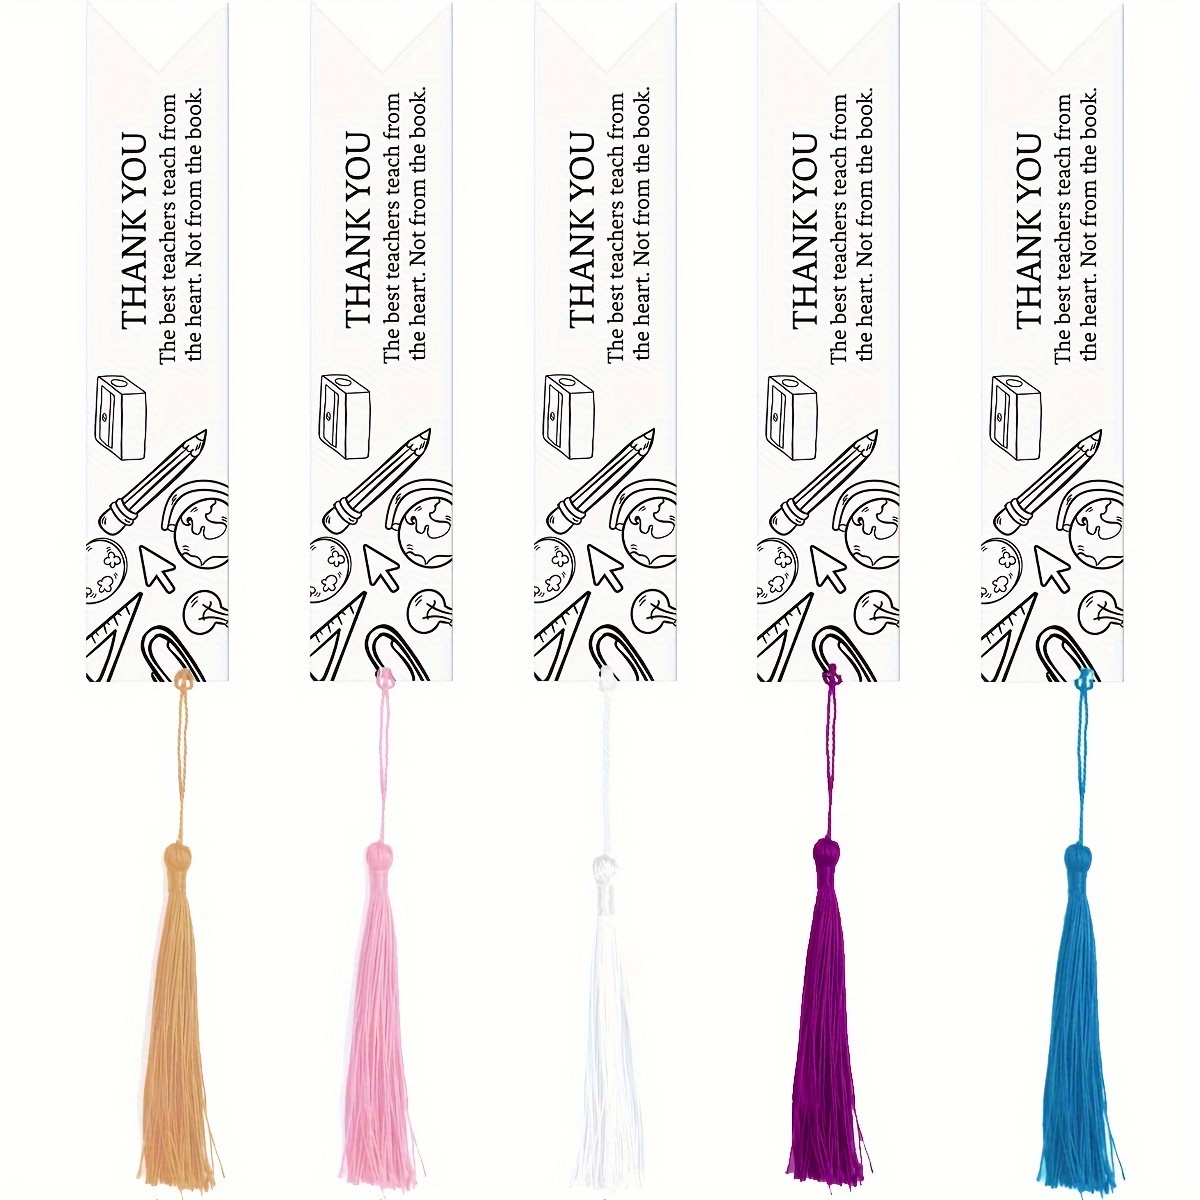 Tecmisse Blank Bookmarks Bulk, 45 Pack Clear Acrylic Craft Bookmarks with  45 Pieces Colorful Tassel, Rectangle Shape DIY Bookmark Ornaments for DIY